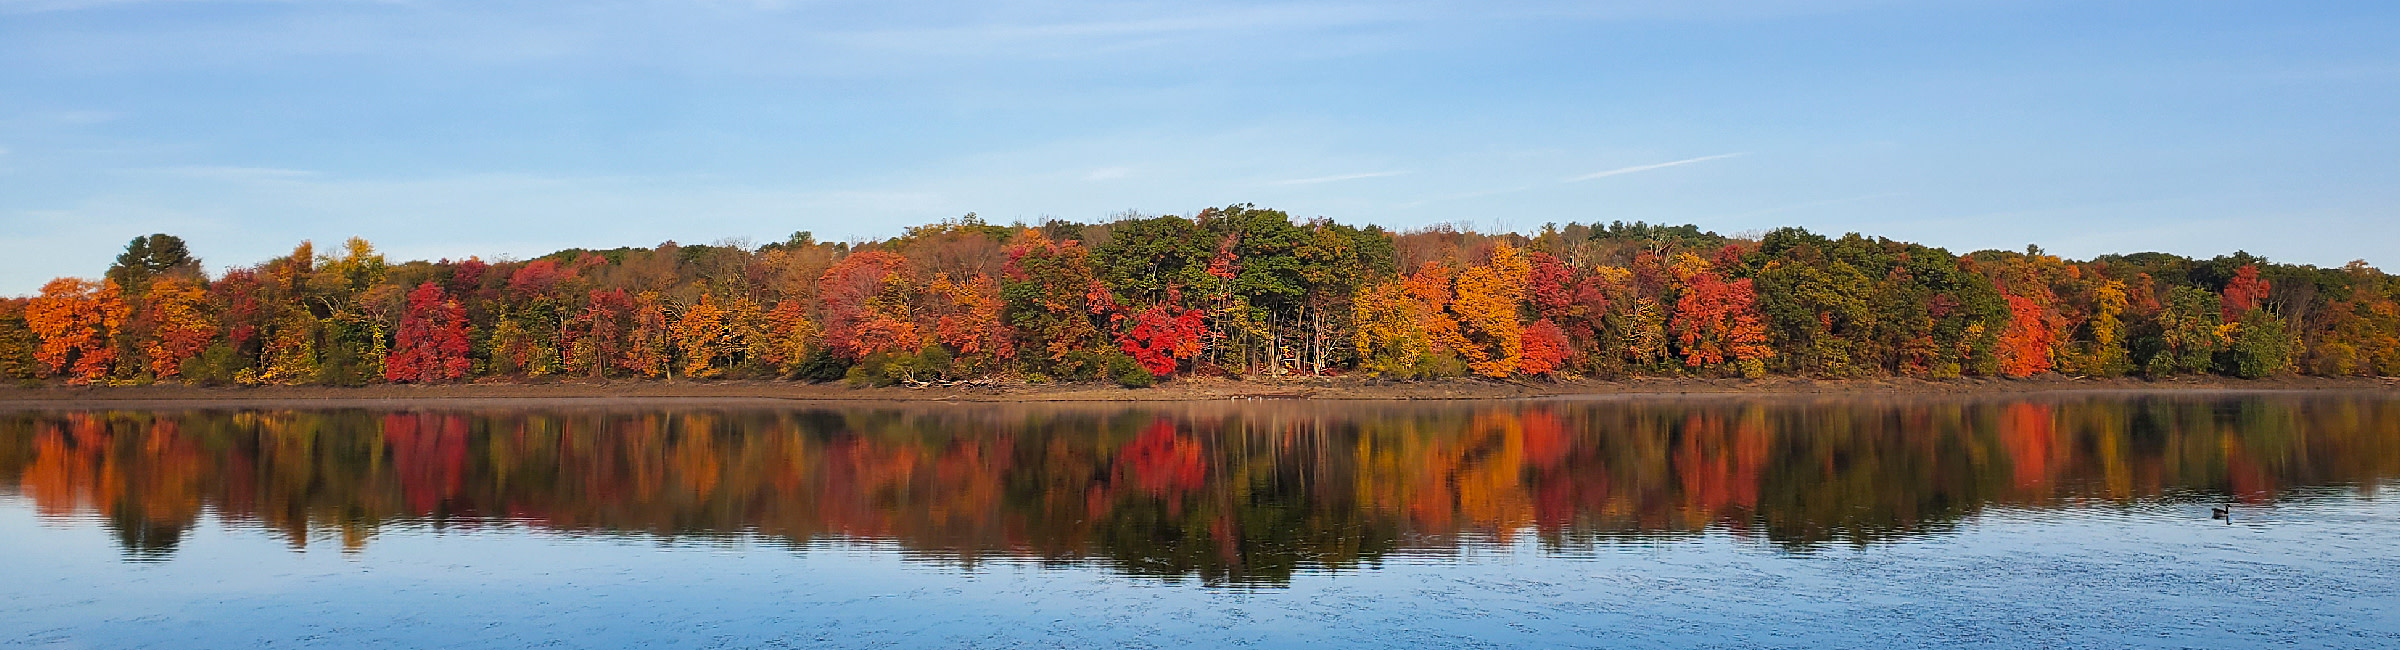 Trees of differing shades of green, yellow, red and brown stand by a body of water in Greenwich, CT.